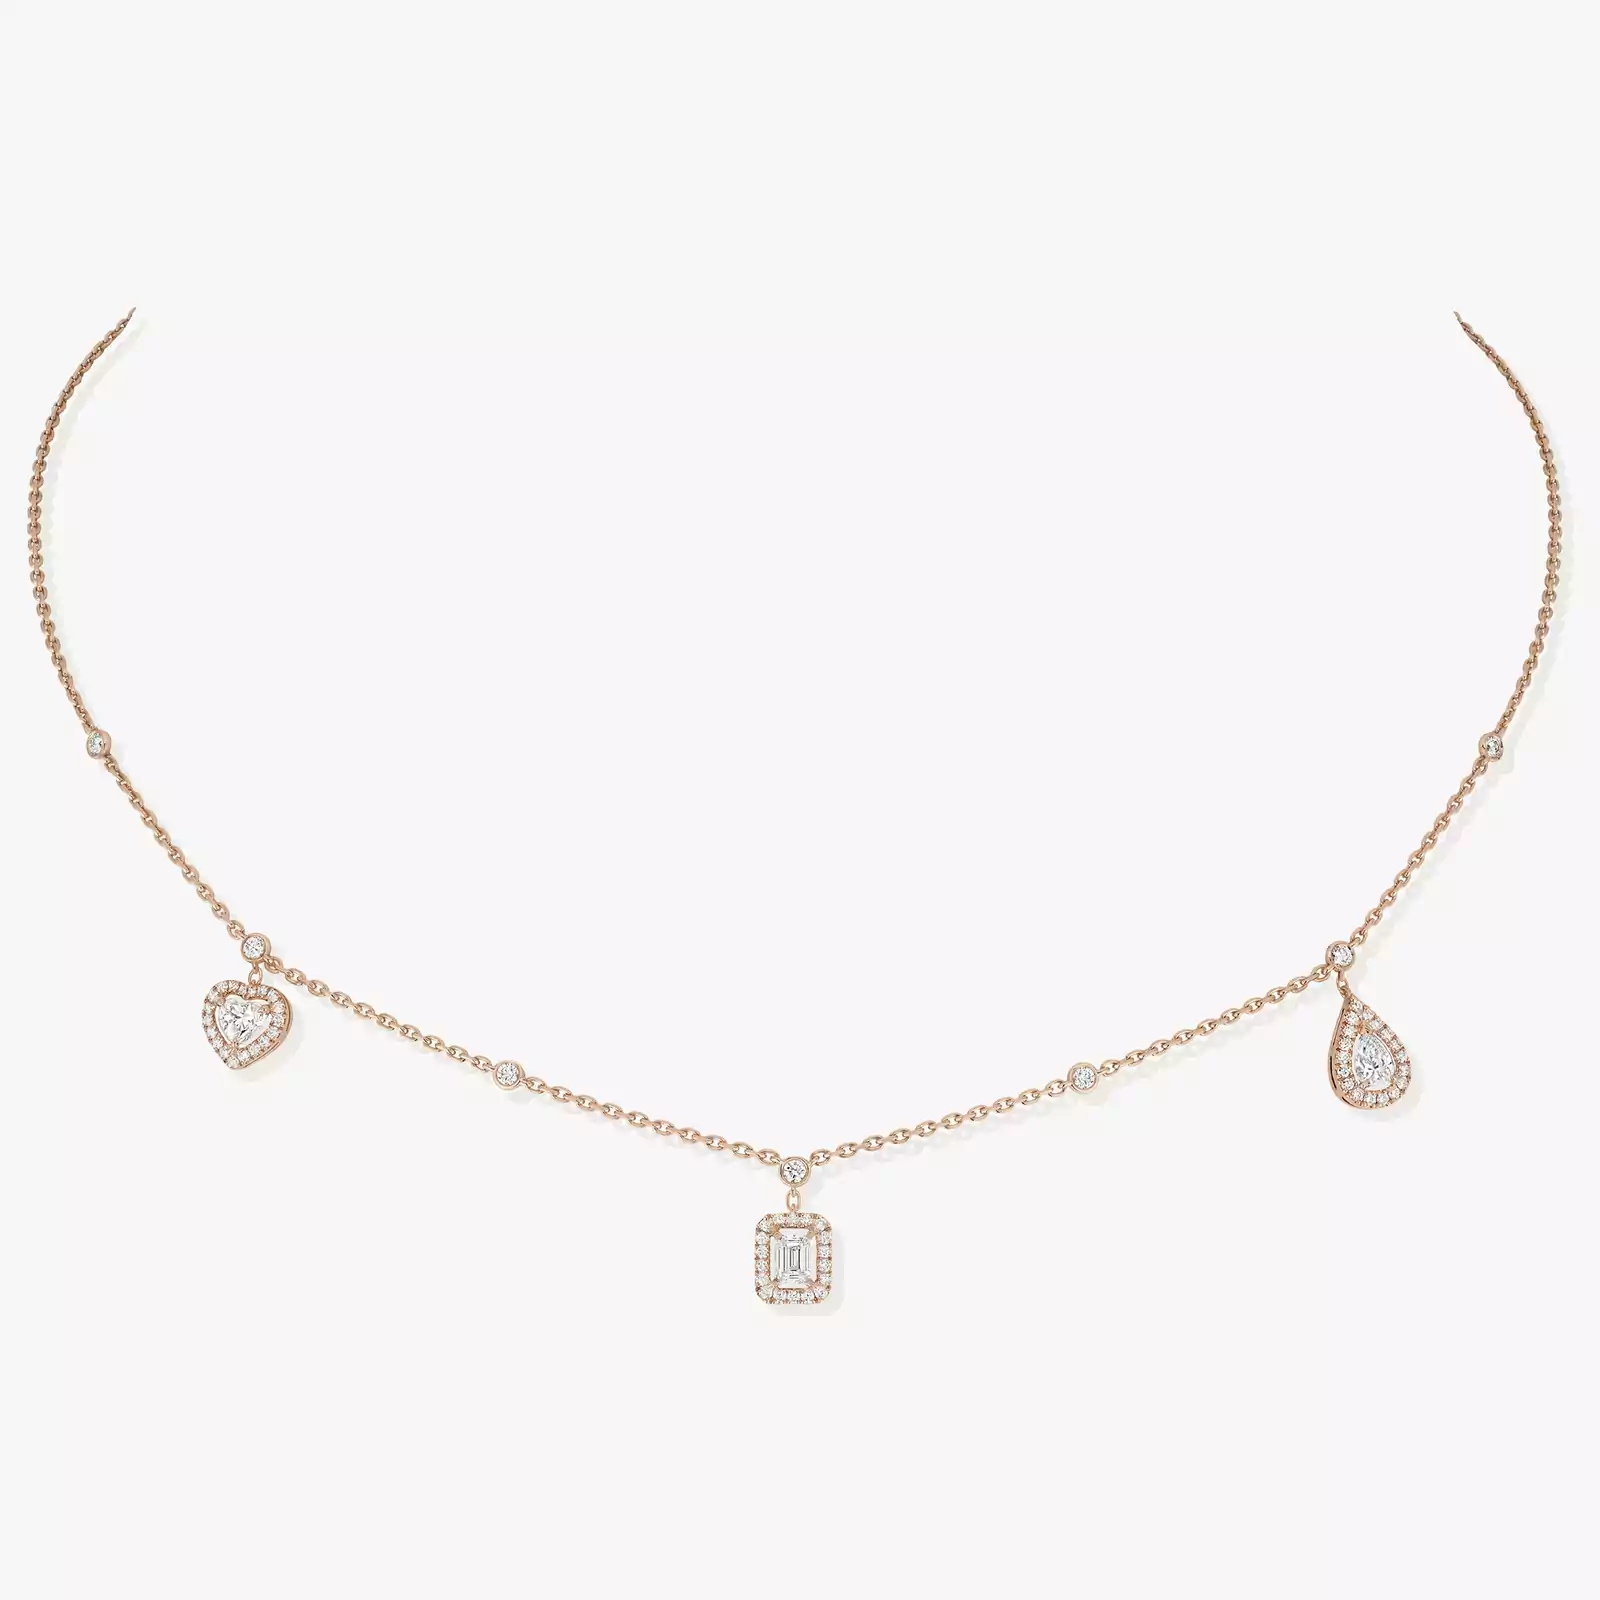 Collier Femme Or Rose Diamant My Twin Trio 3x0,15ct 11945-PG